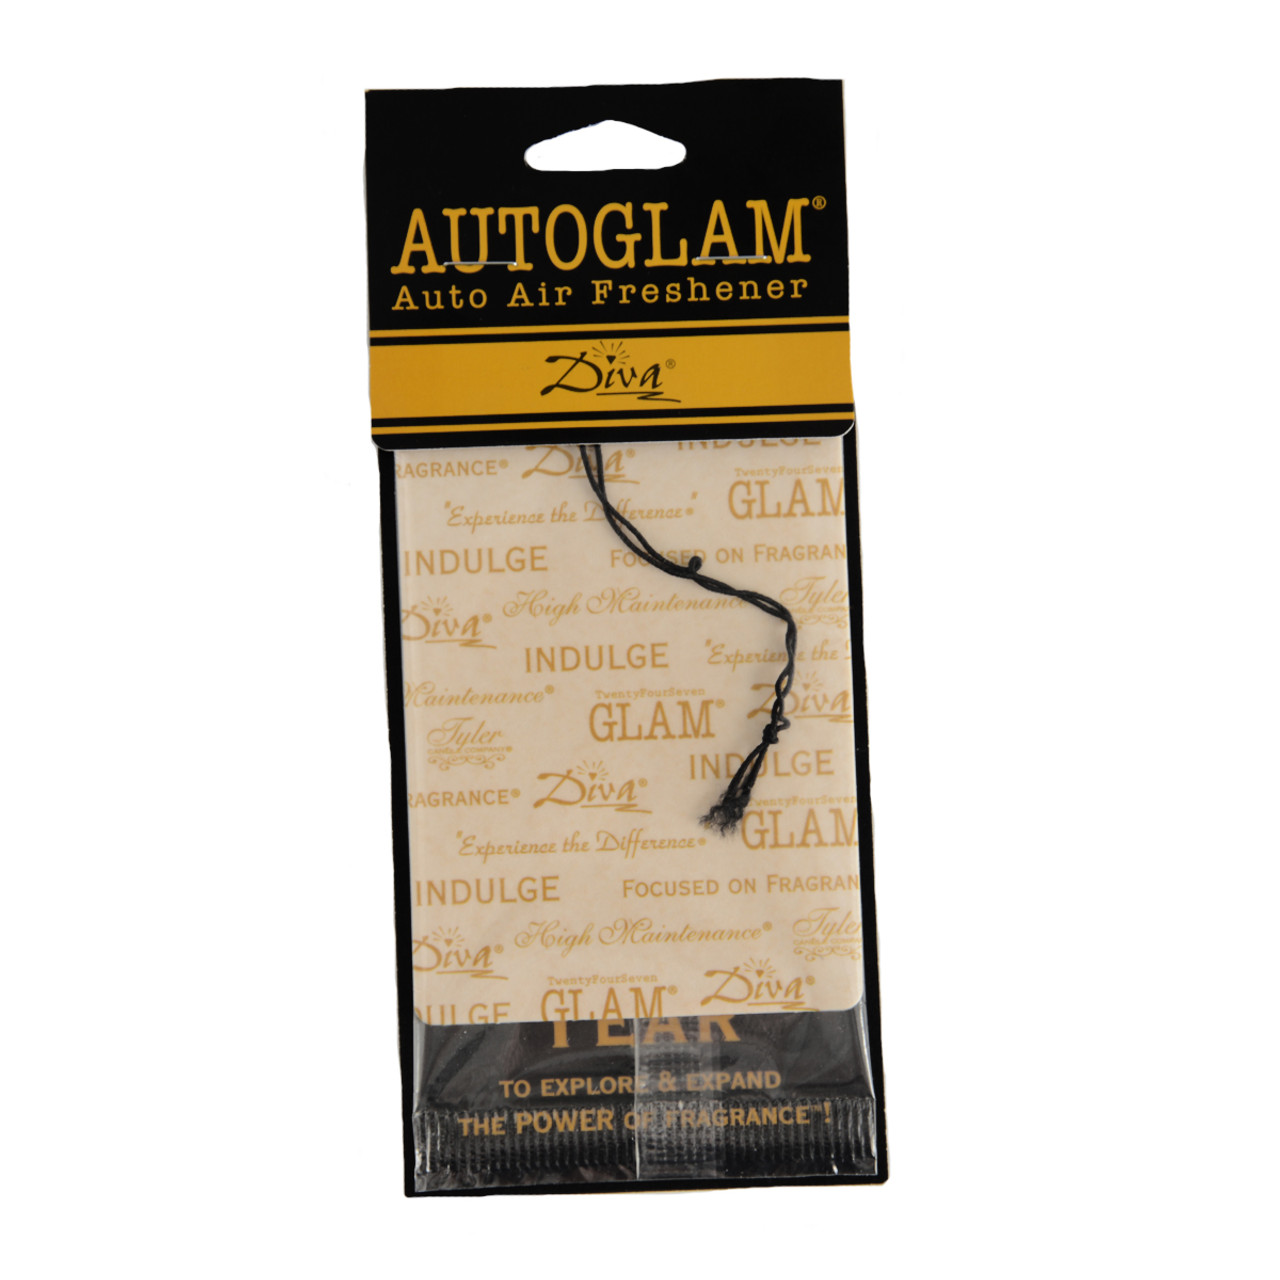 Tyler Candle Company AutoGlam Car Air Fresheners - Icon Scent Car  Fresheners | Car Odor Eliminator Air Refresher | Car Accessories - with  Worldwide